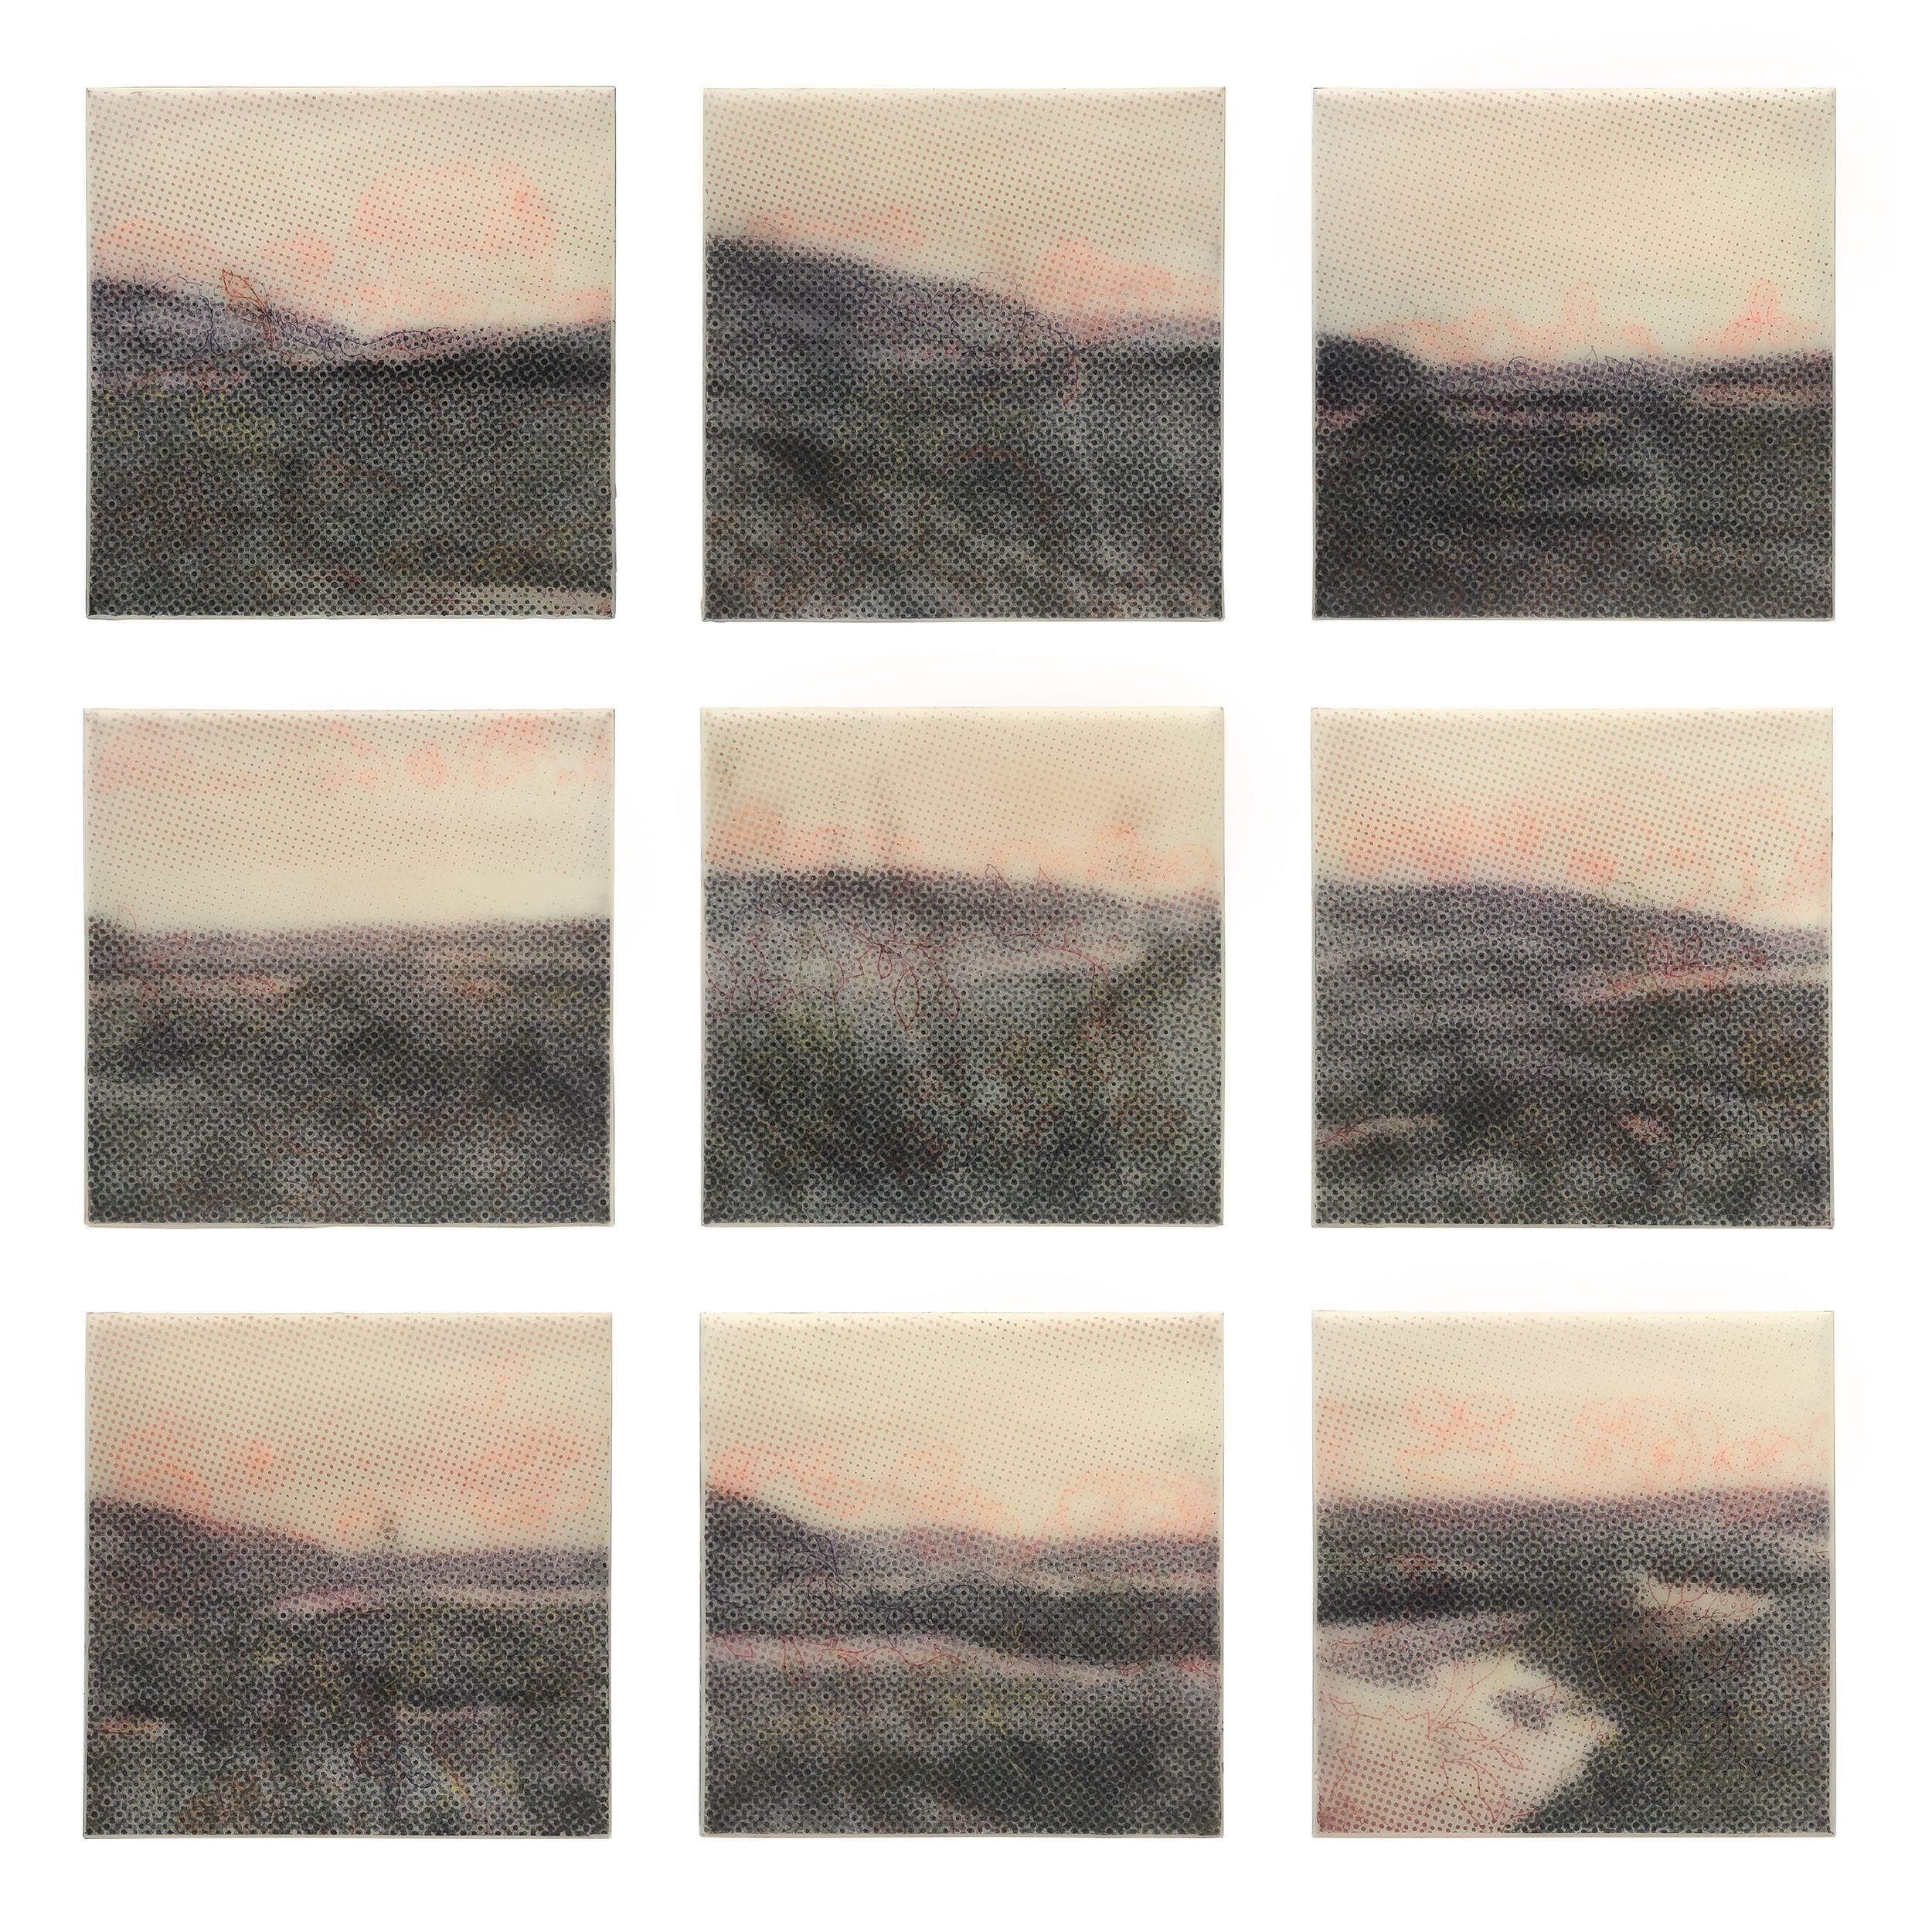 Karen Gallagher Iverson, Wine Dark Tides, Point Reyes Tidal Flats 1-9, Pochoir printed and drawn colored pastel on wax on nine panels, 18 x 18 in, 2019